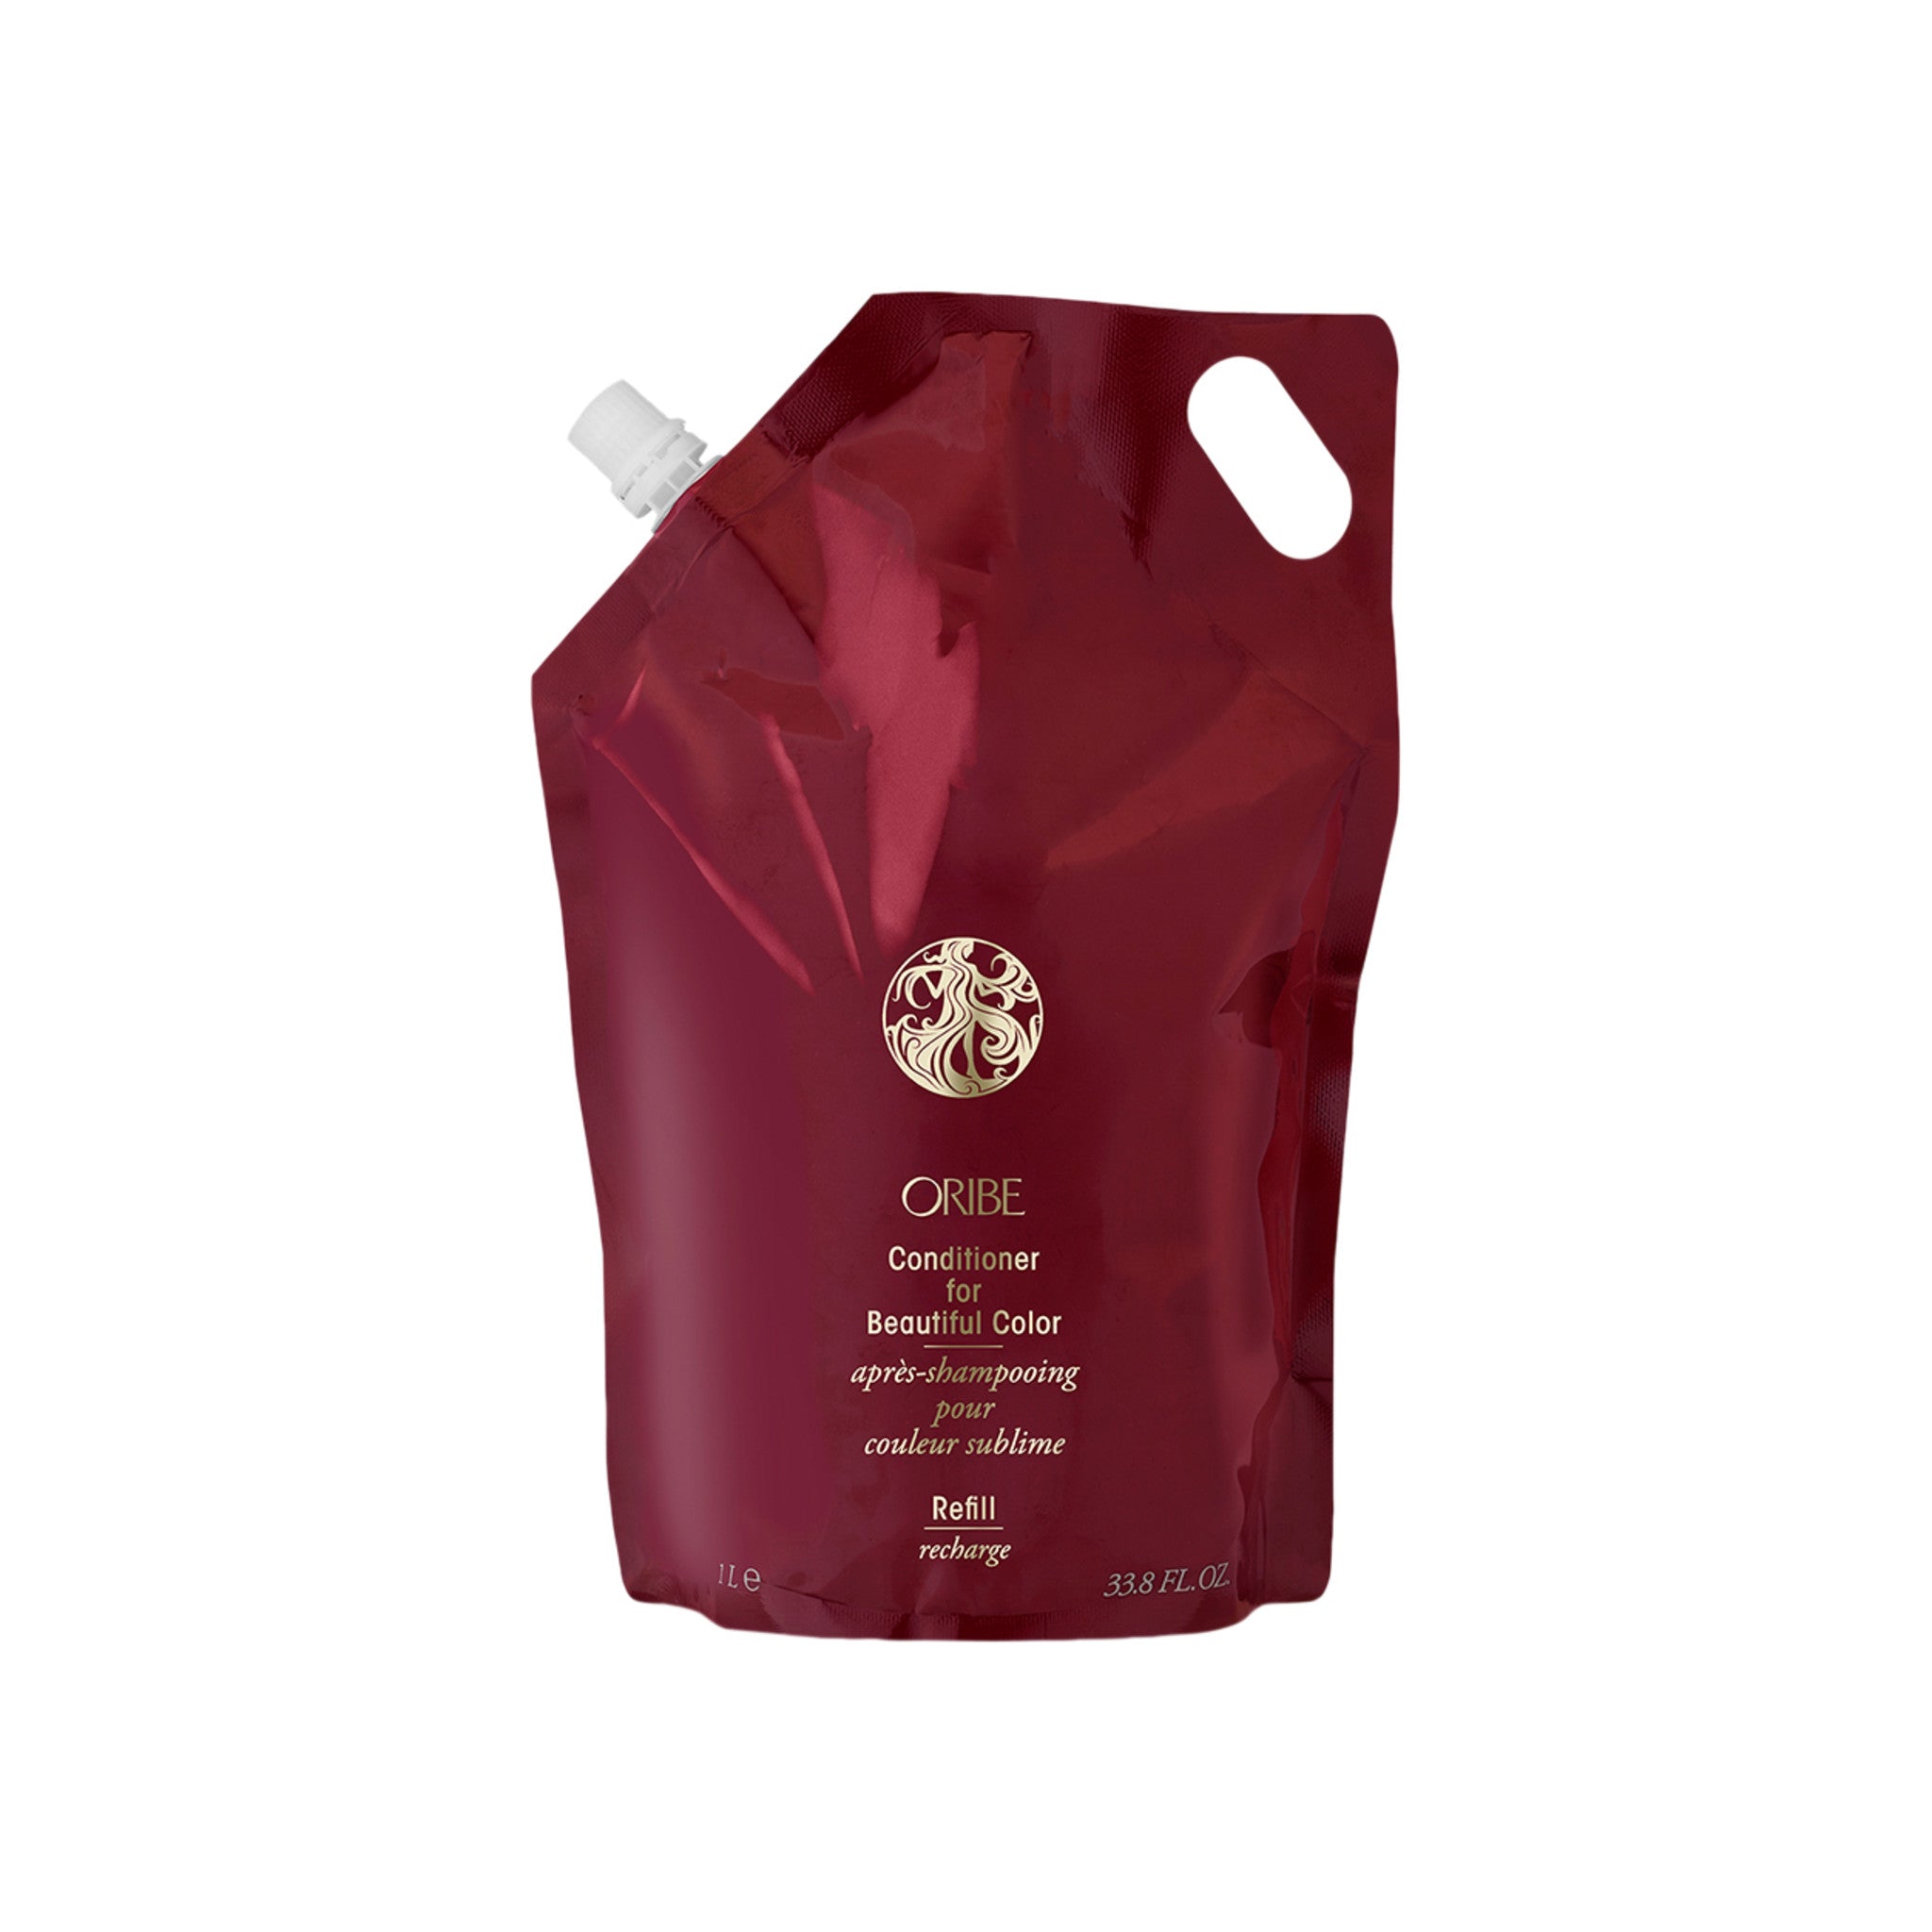 Oribe Conditioner for Beautiful Color Refill Pouch main image.